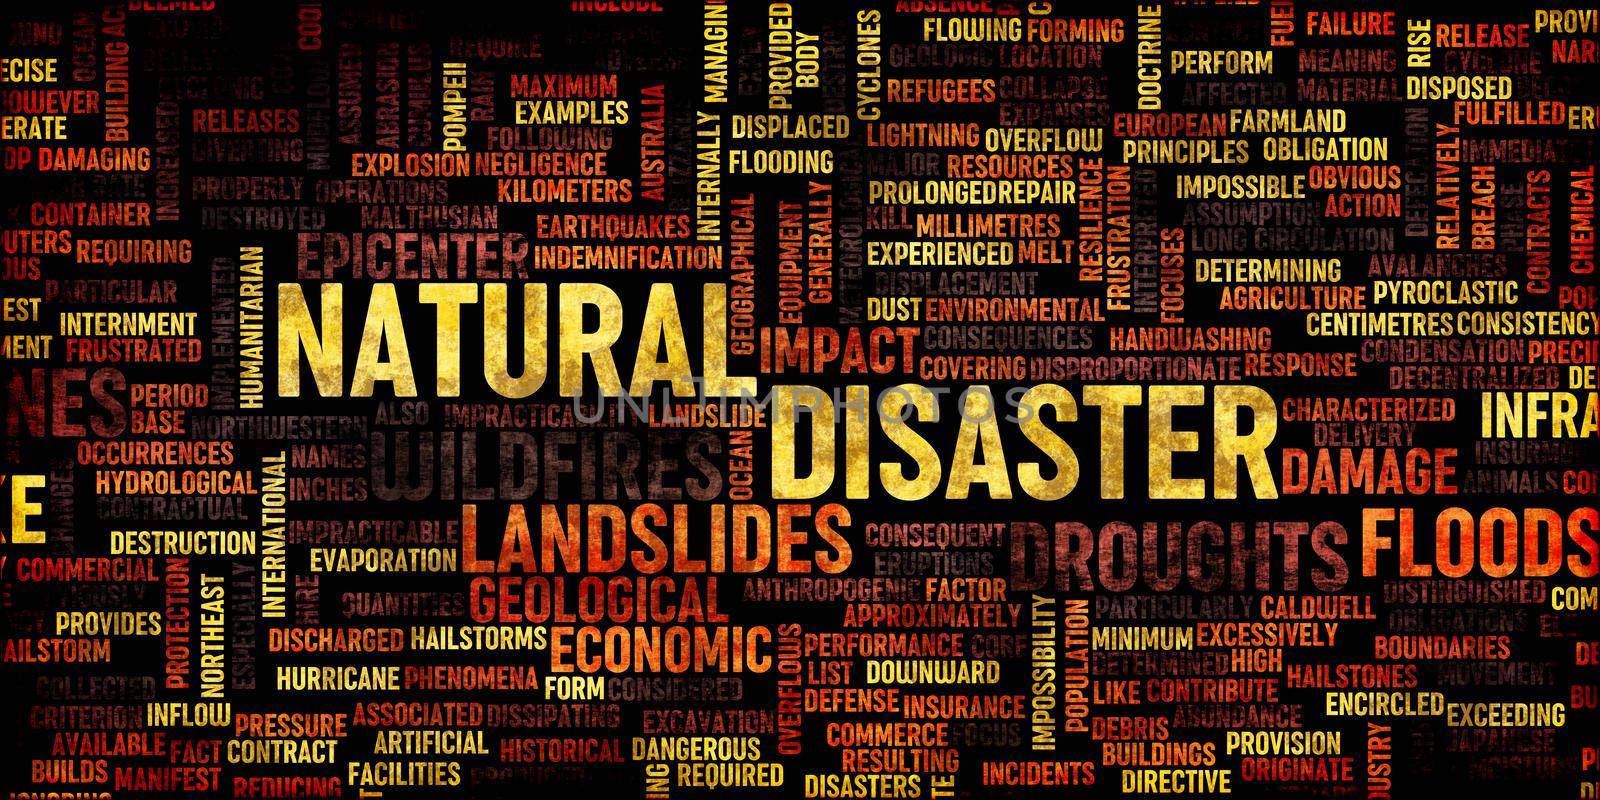 Natural Disaster and Destruction Aftermath as a Concept